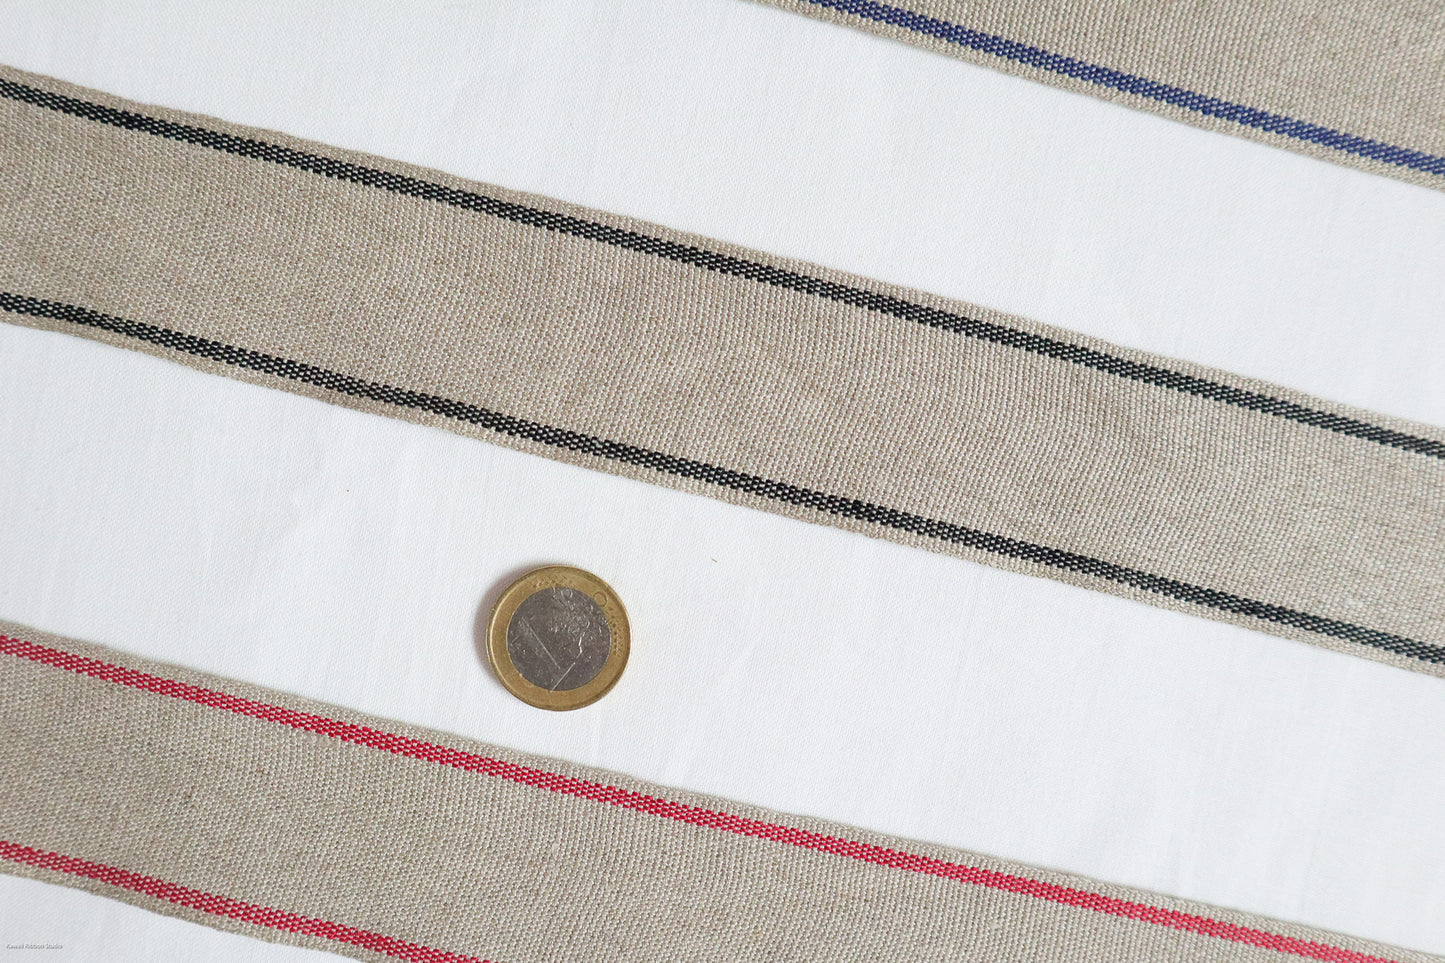 30mm & 38mm stripe ribbon/ tape for embroidery in 100% washed linen